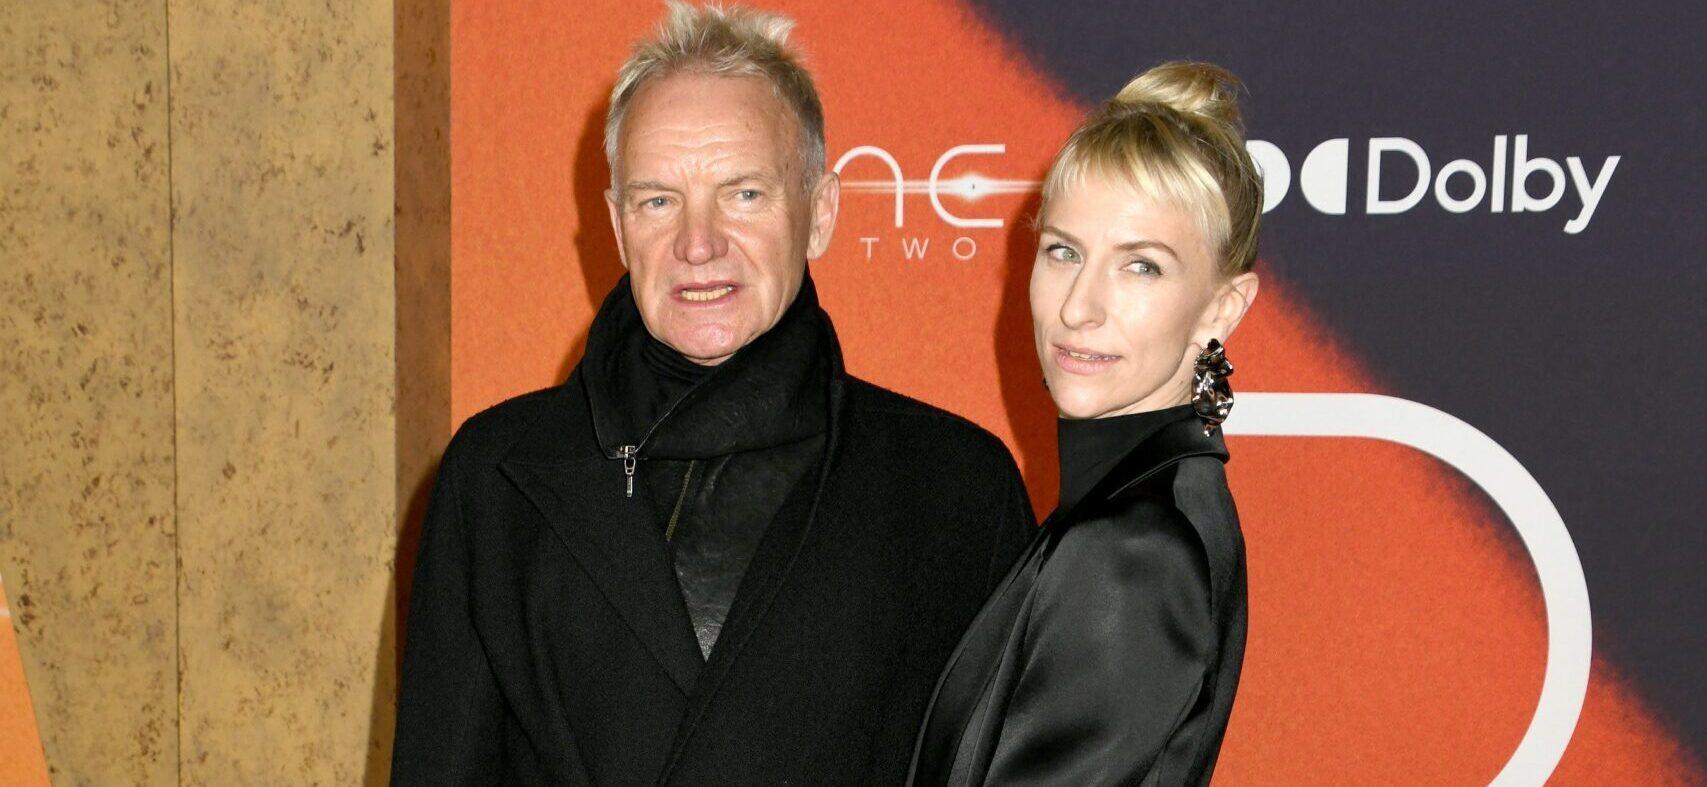 Sting's Daughter Mickey Sumner To Recieve $7,000 A Month In Child Support As She Finalizes Divorce